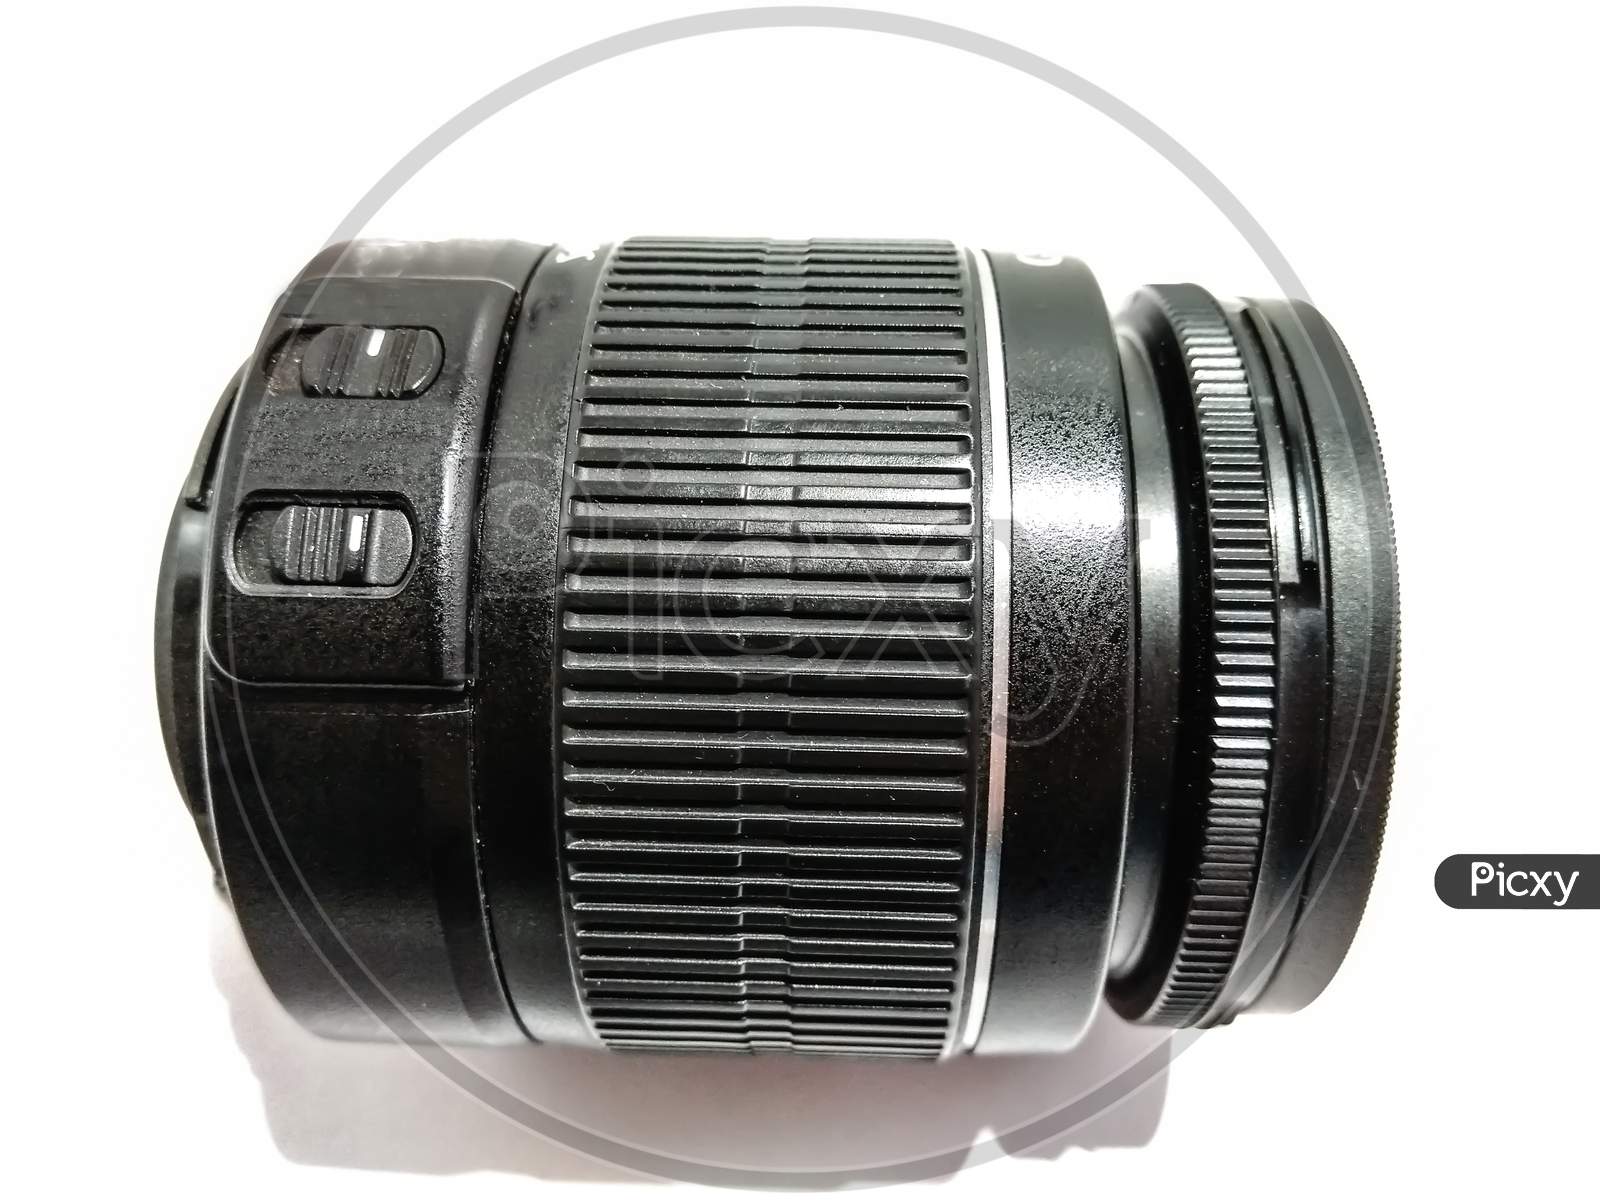 A picture of dslr lens on white background